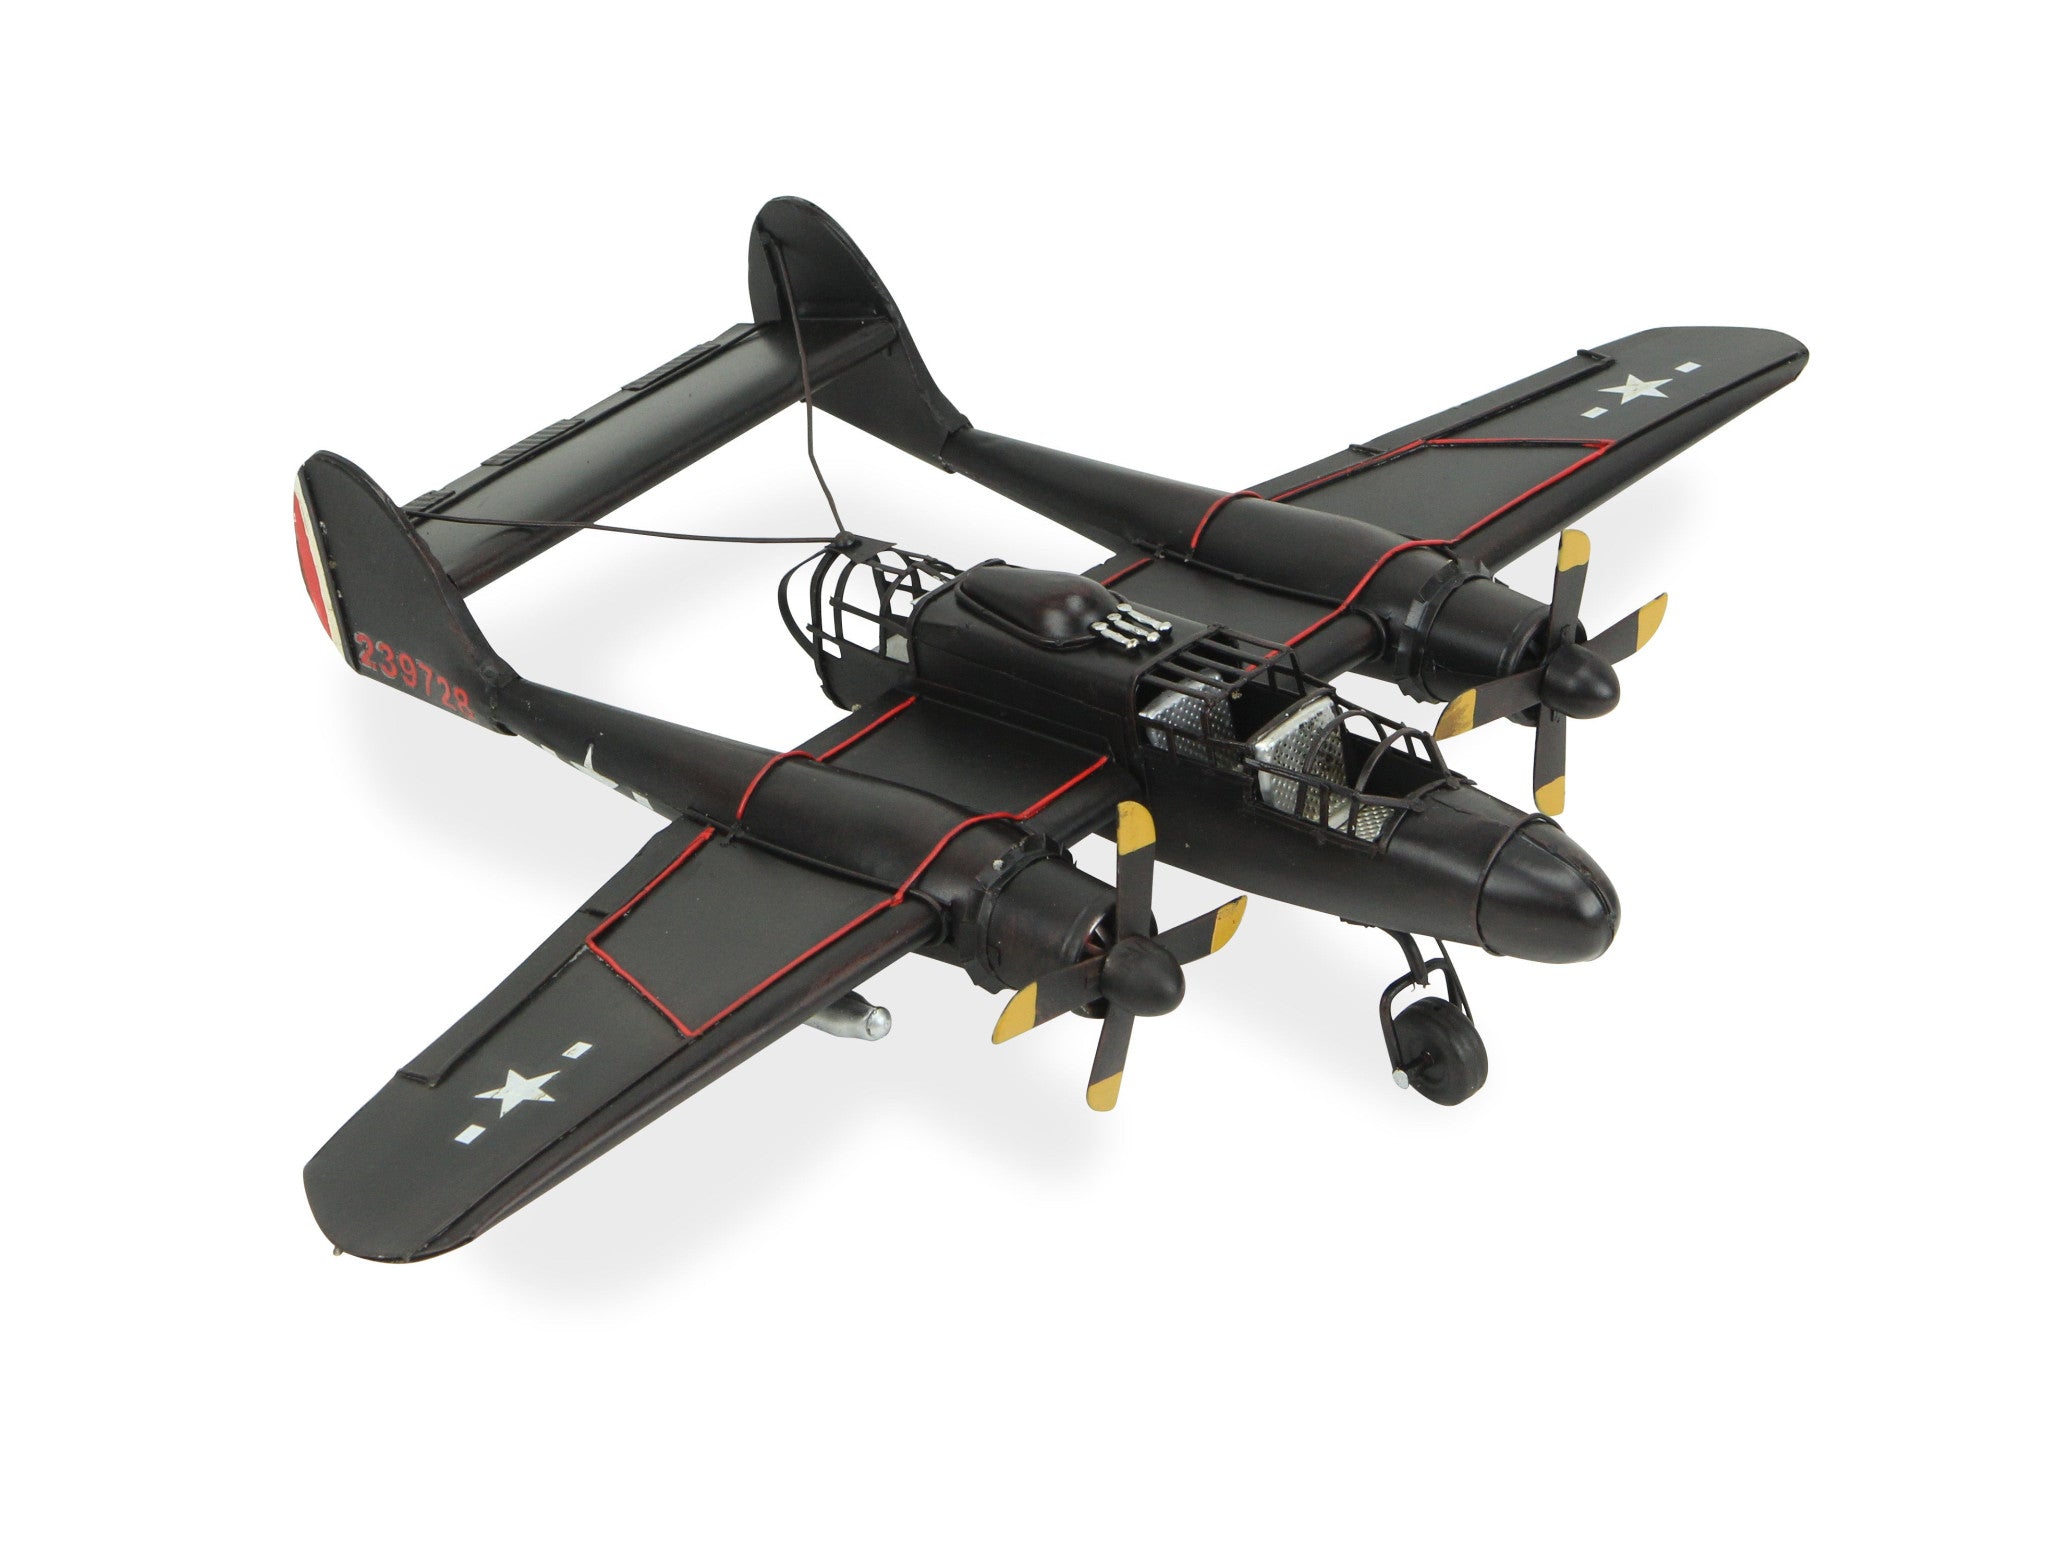 4" Black and Red Metal Hand Painted Model Airplane